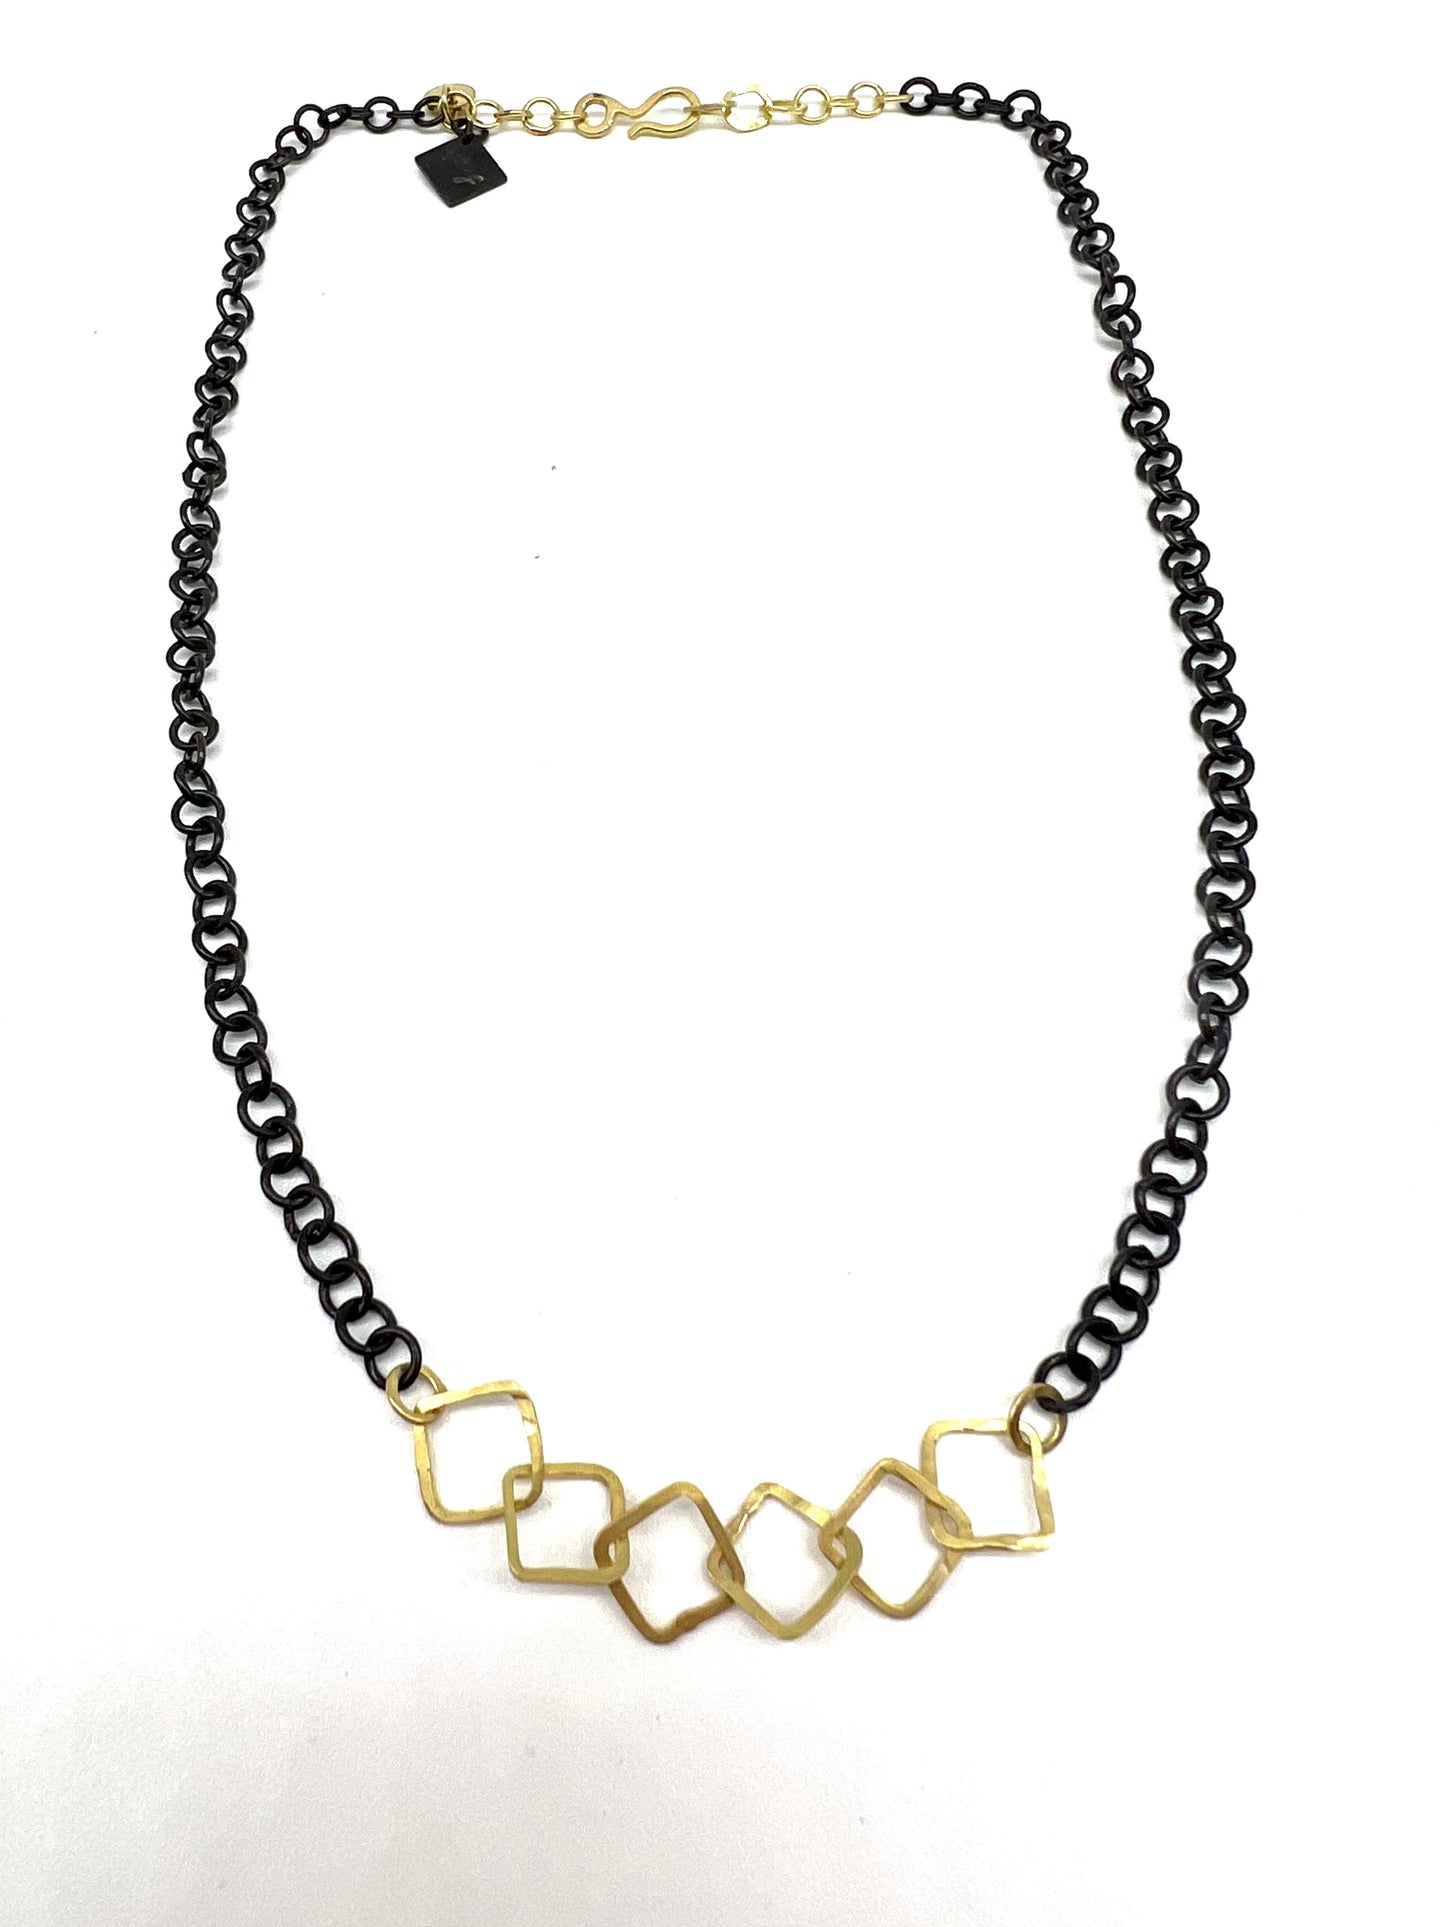 Handmade 18kt Yellow Gold, Oxidized Sterling Silver Chain